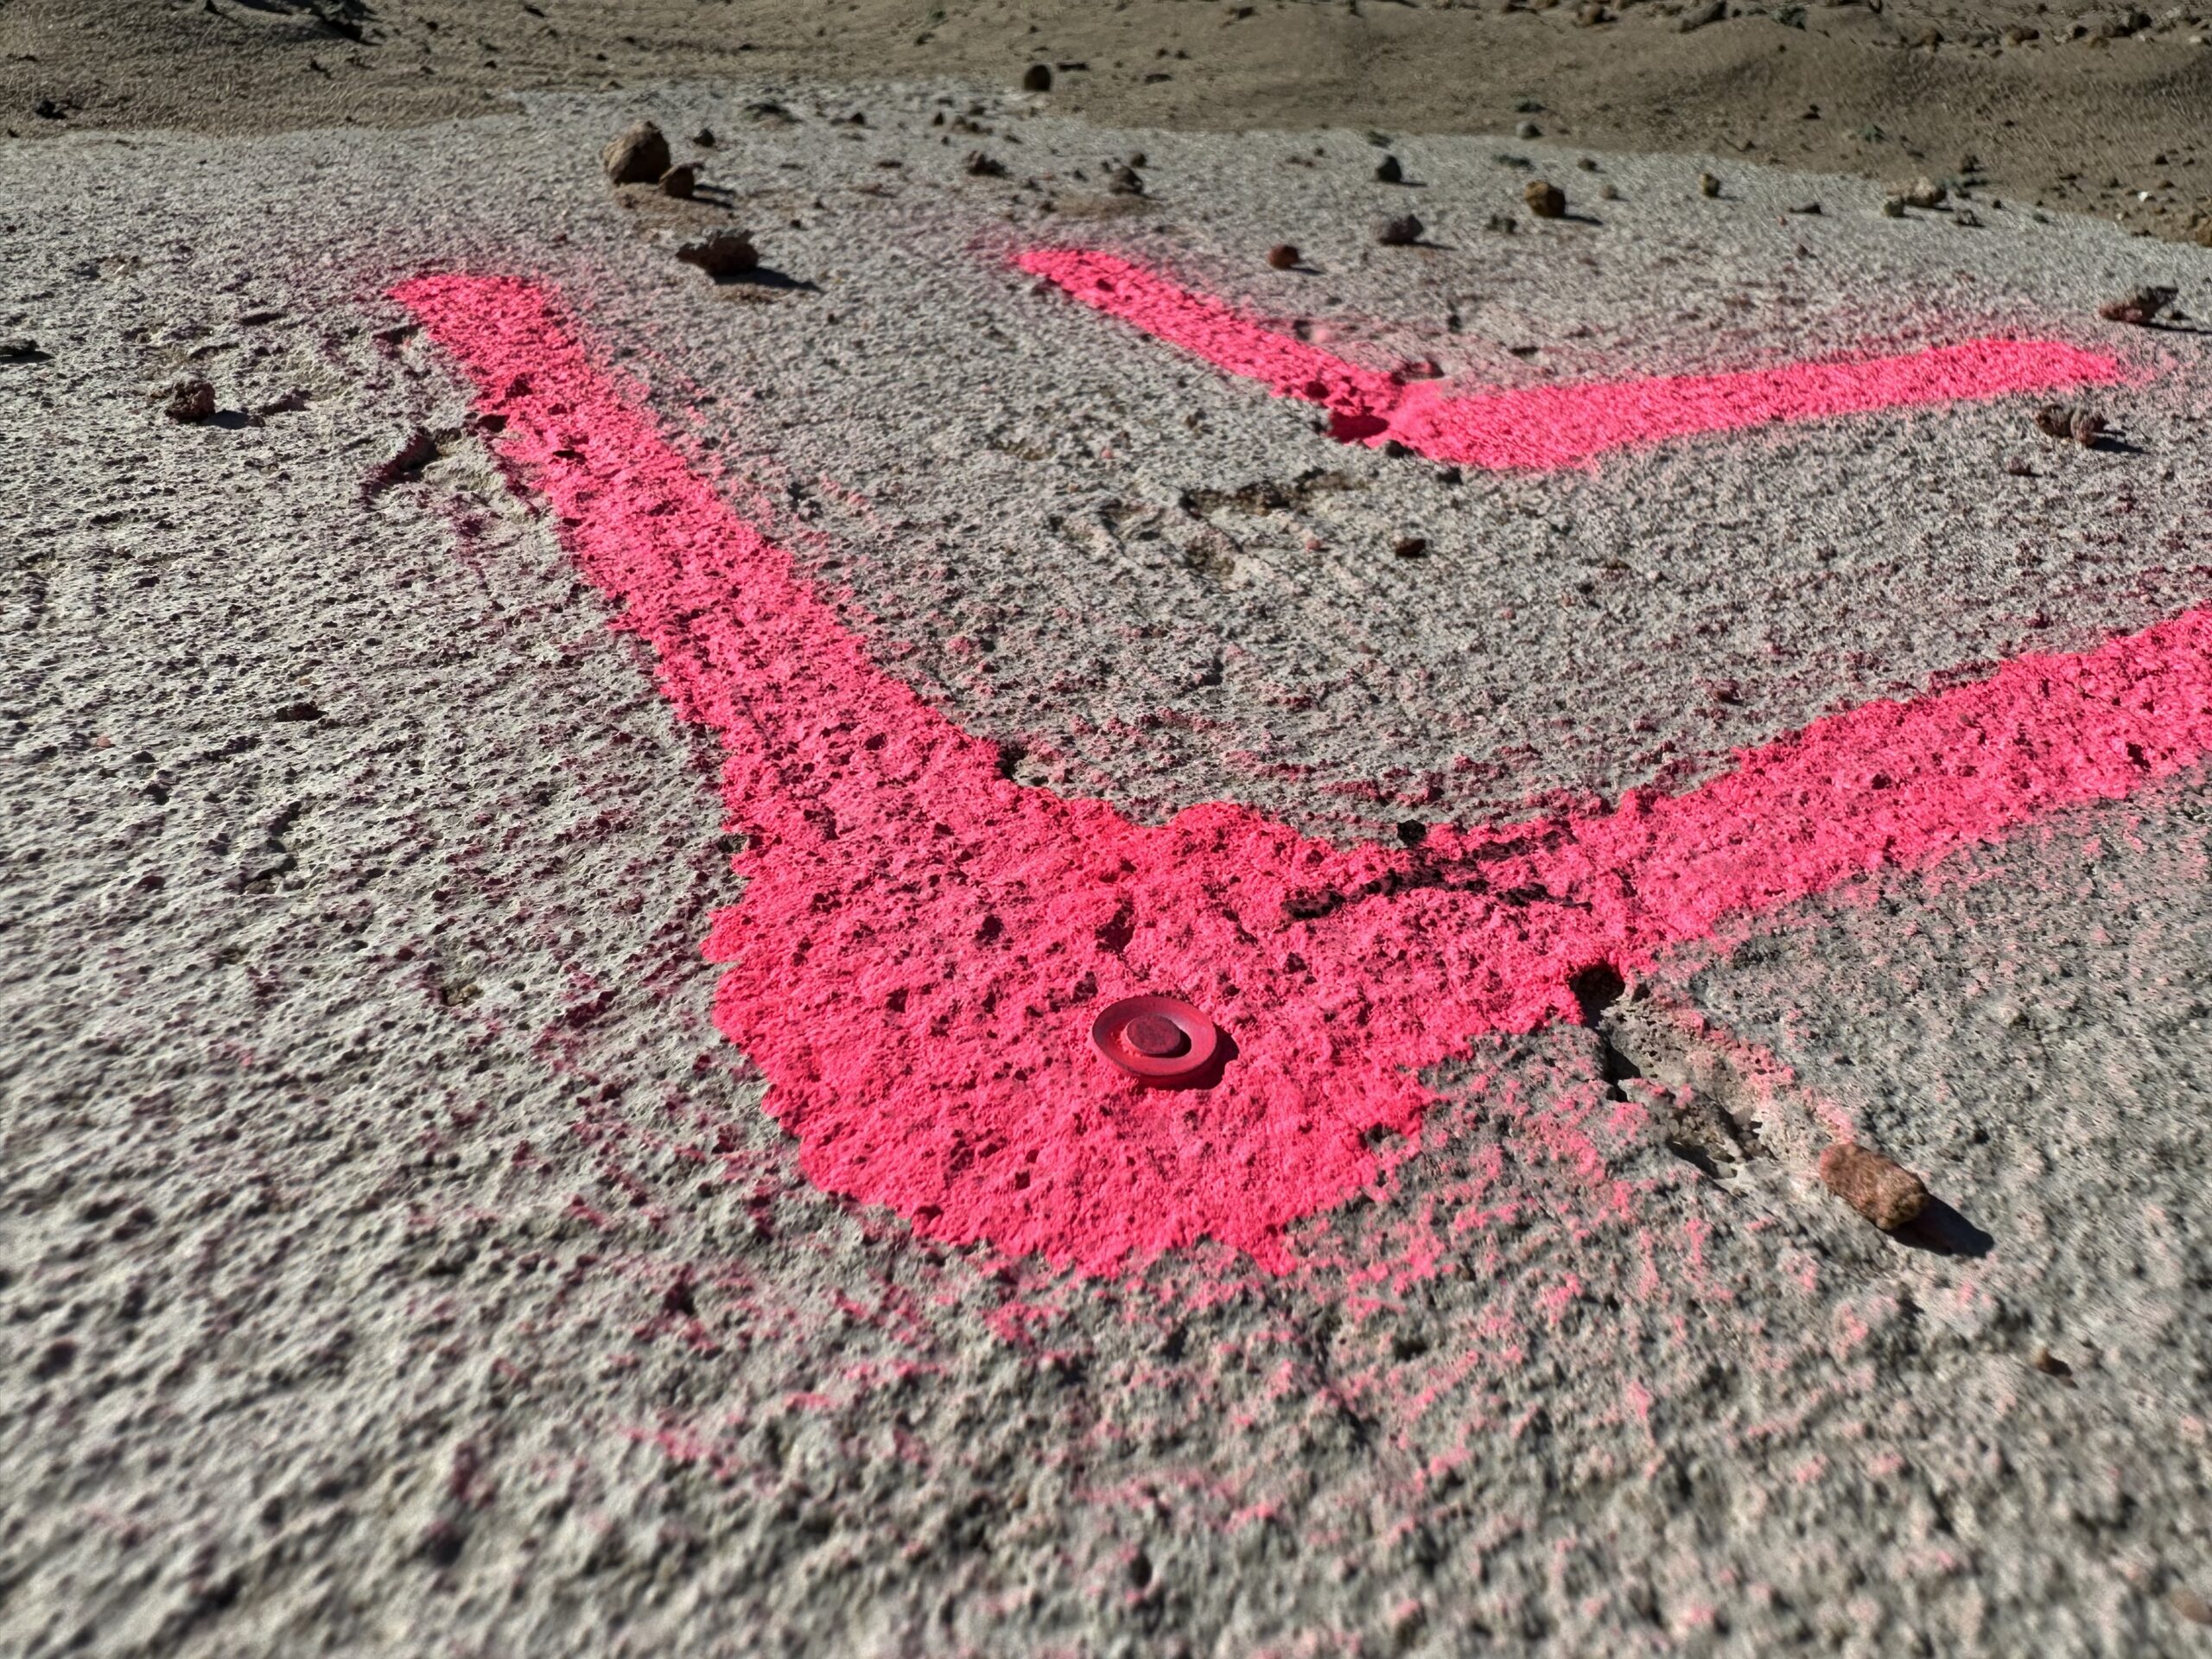 A photo of a nail placed in concrete as part of construction setout, sprayed pink